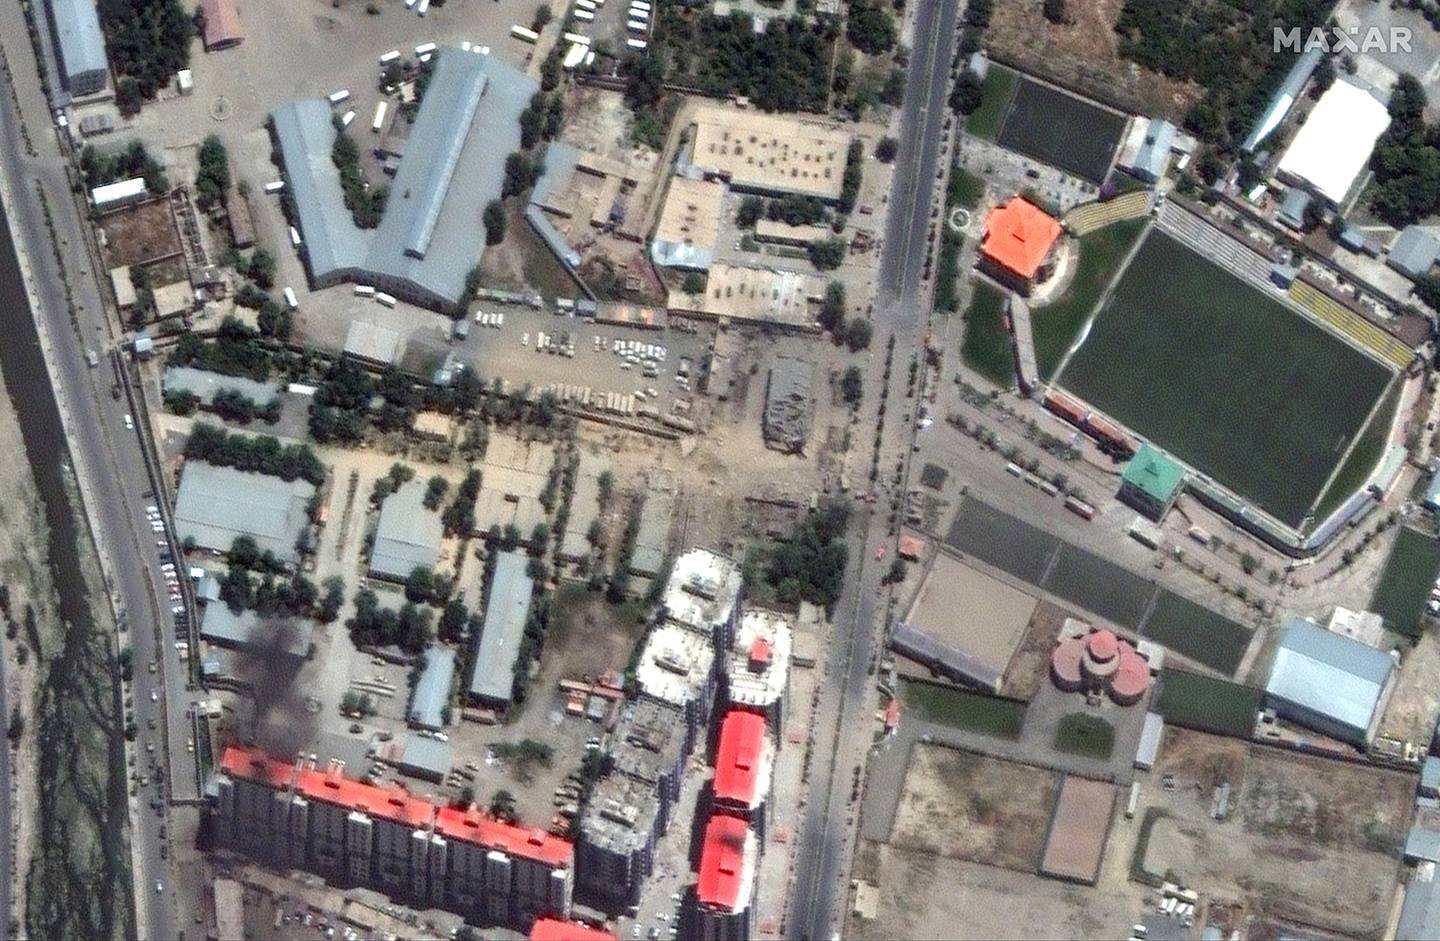 A satellite image shows the aftermath of a bombing in Kabul, Afghanistan, on July 1, 2019.